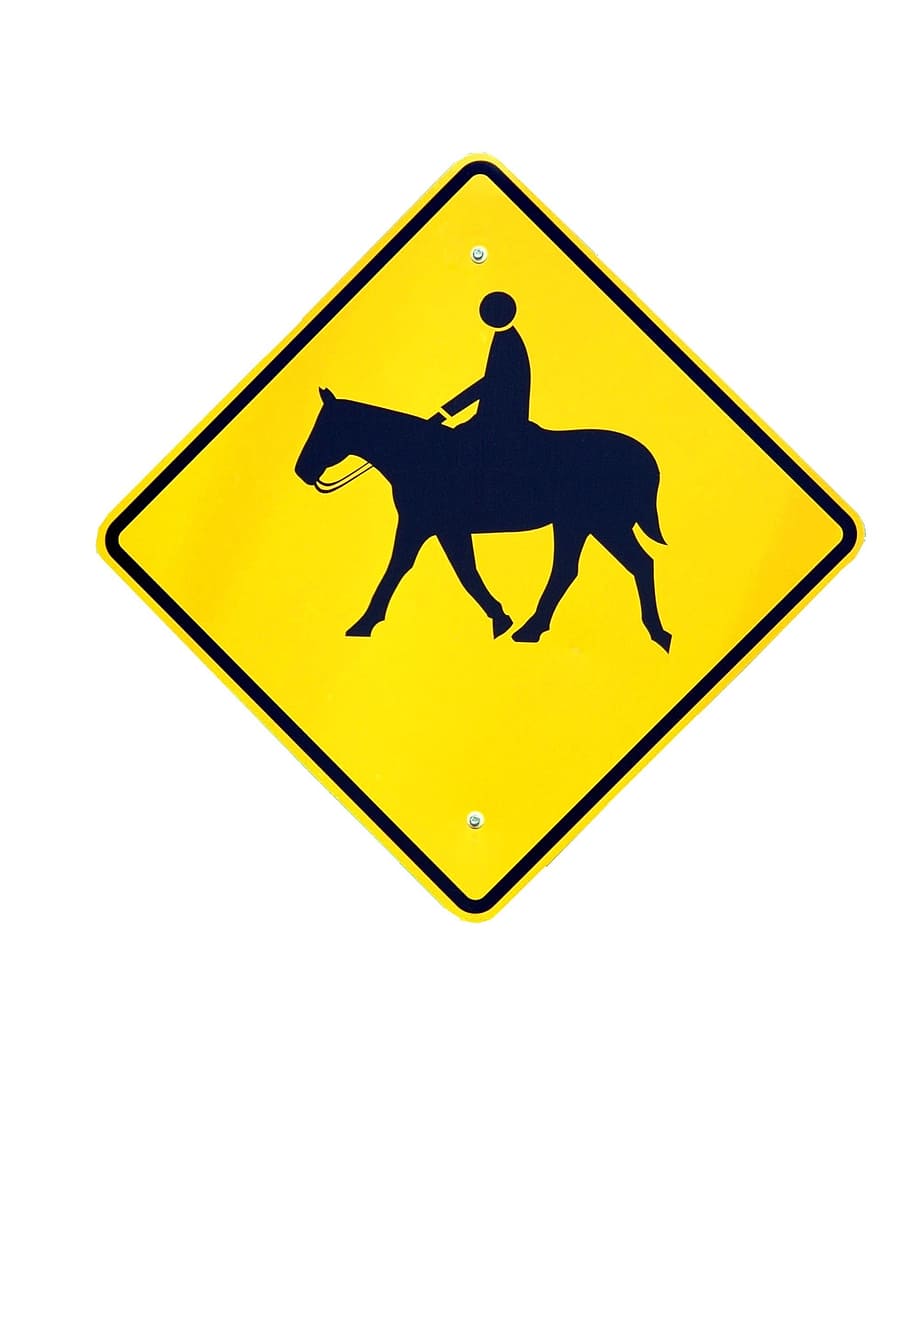 warning, traffic, sign, danger, safety, caution, triangle, endanger, isolated, road